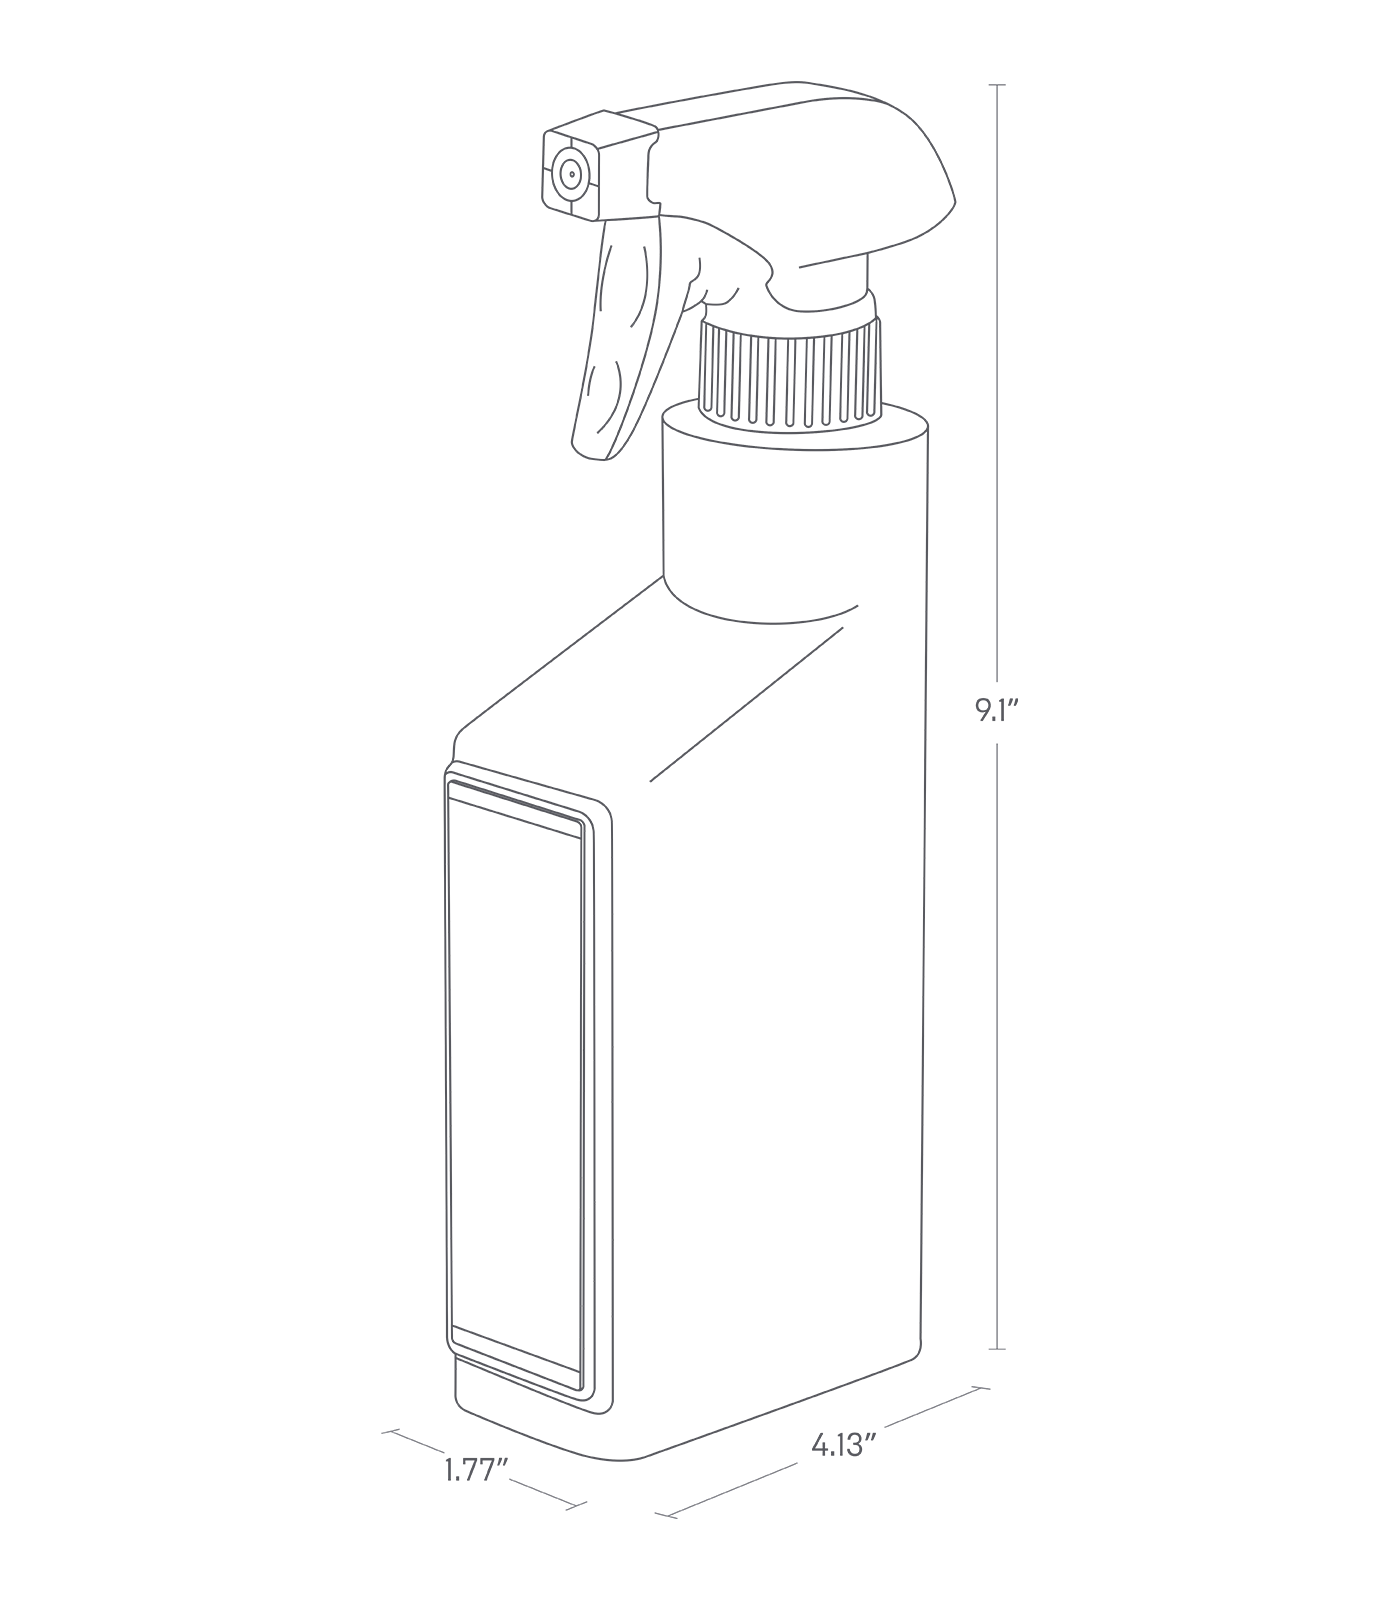 Dimension image for Magnetic Spray Bottle showing length of 4.13